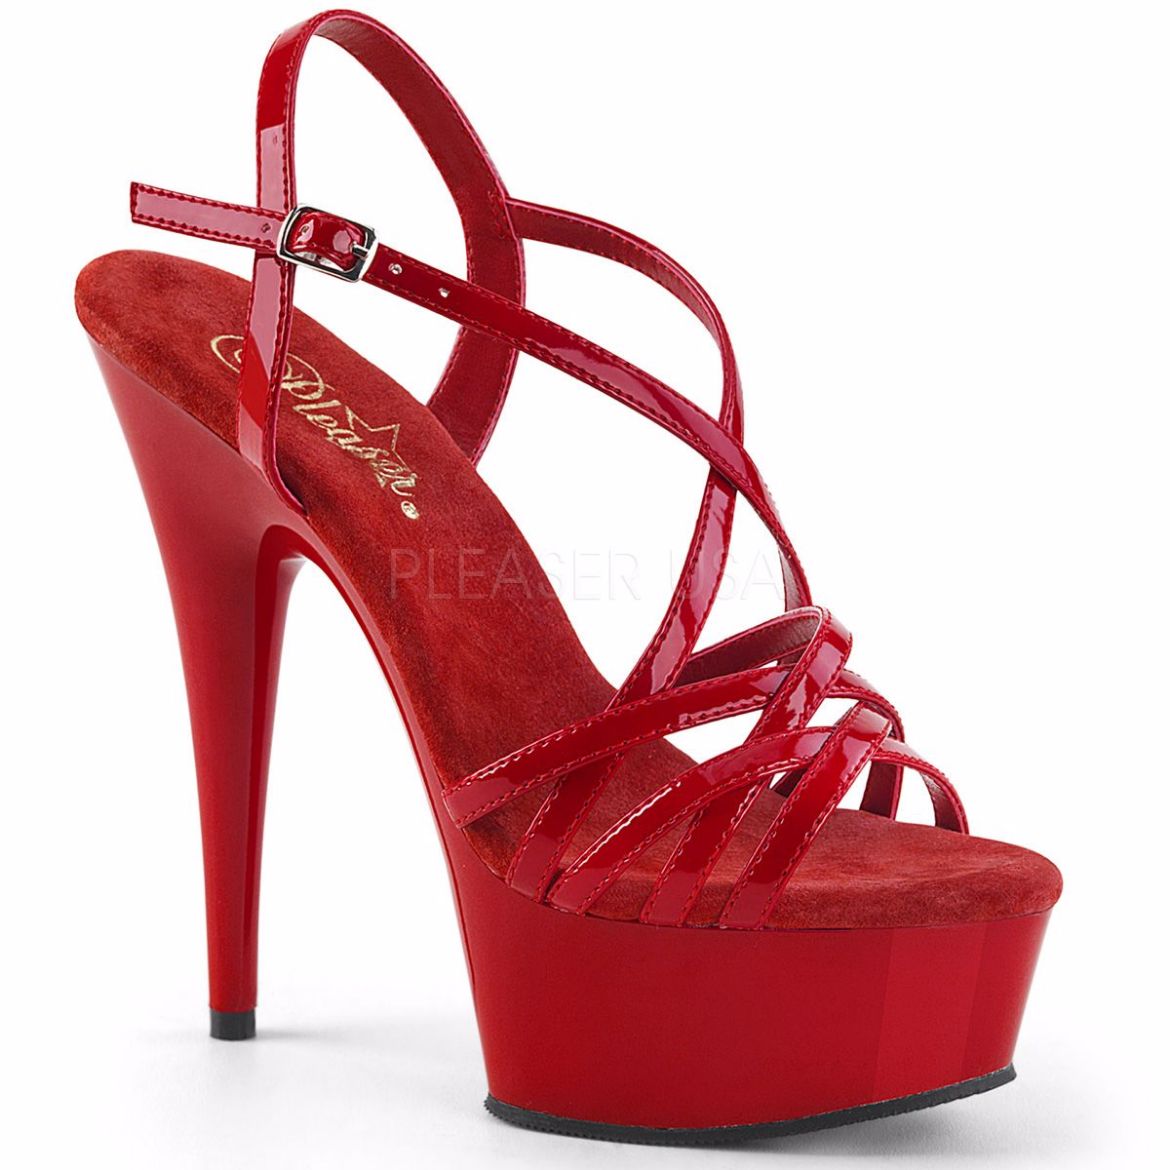 Product image of Pleaser Delight-613 Red Patent/Red, 6 inch (15.2 cm) Heel, 1 3/4 inch (4.4 cm) Platform Sandal Shoes